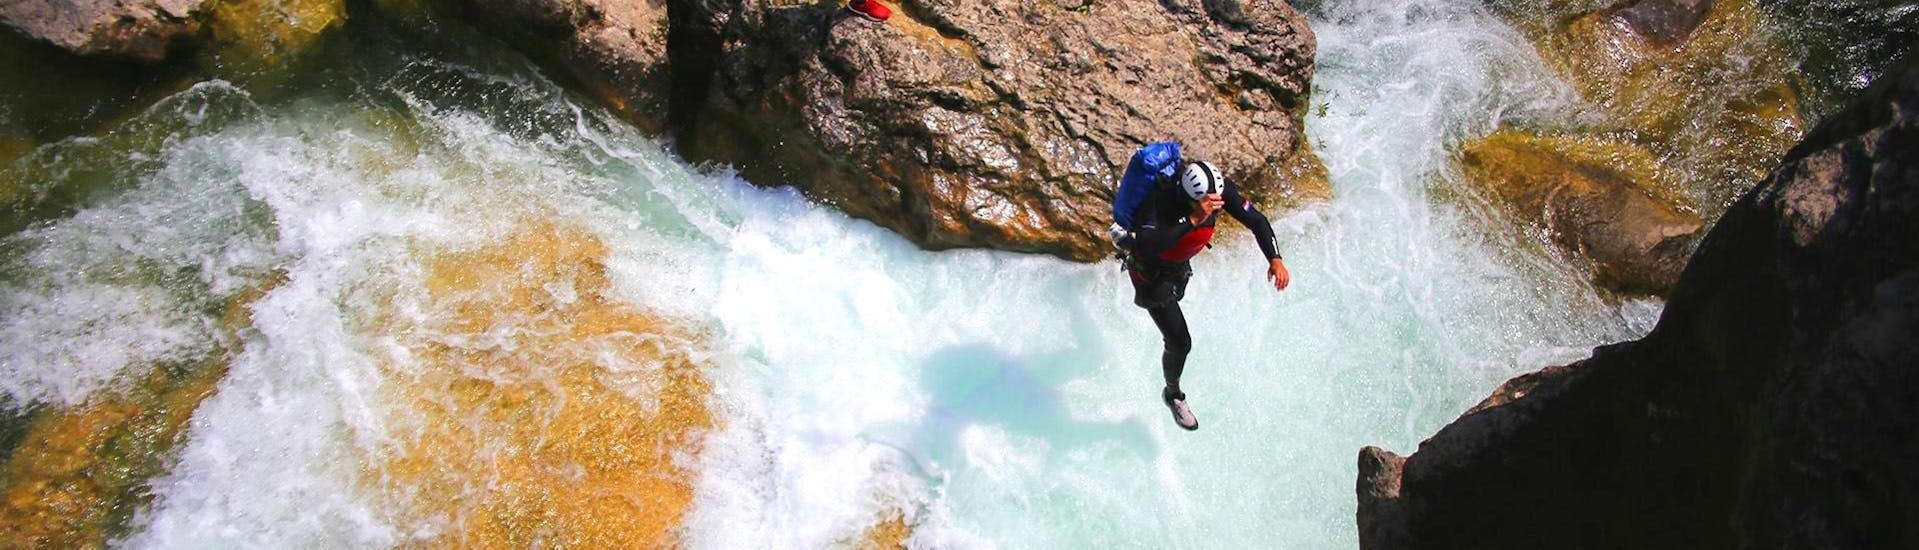 A canyoning guide from Adventure Dalmatia is jumping into the water during the Canyoning for Beginners at Cetina River.